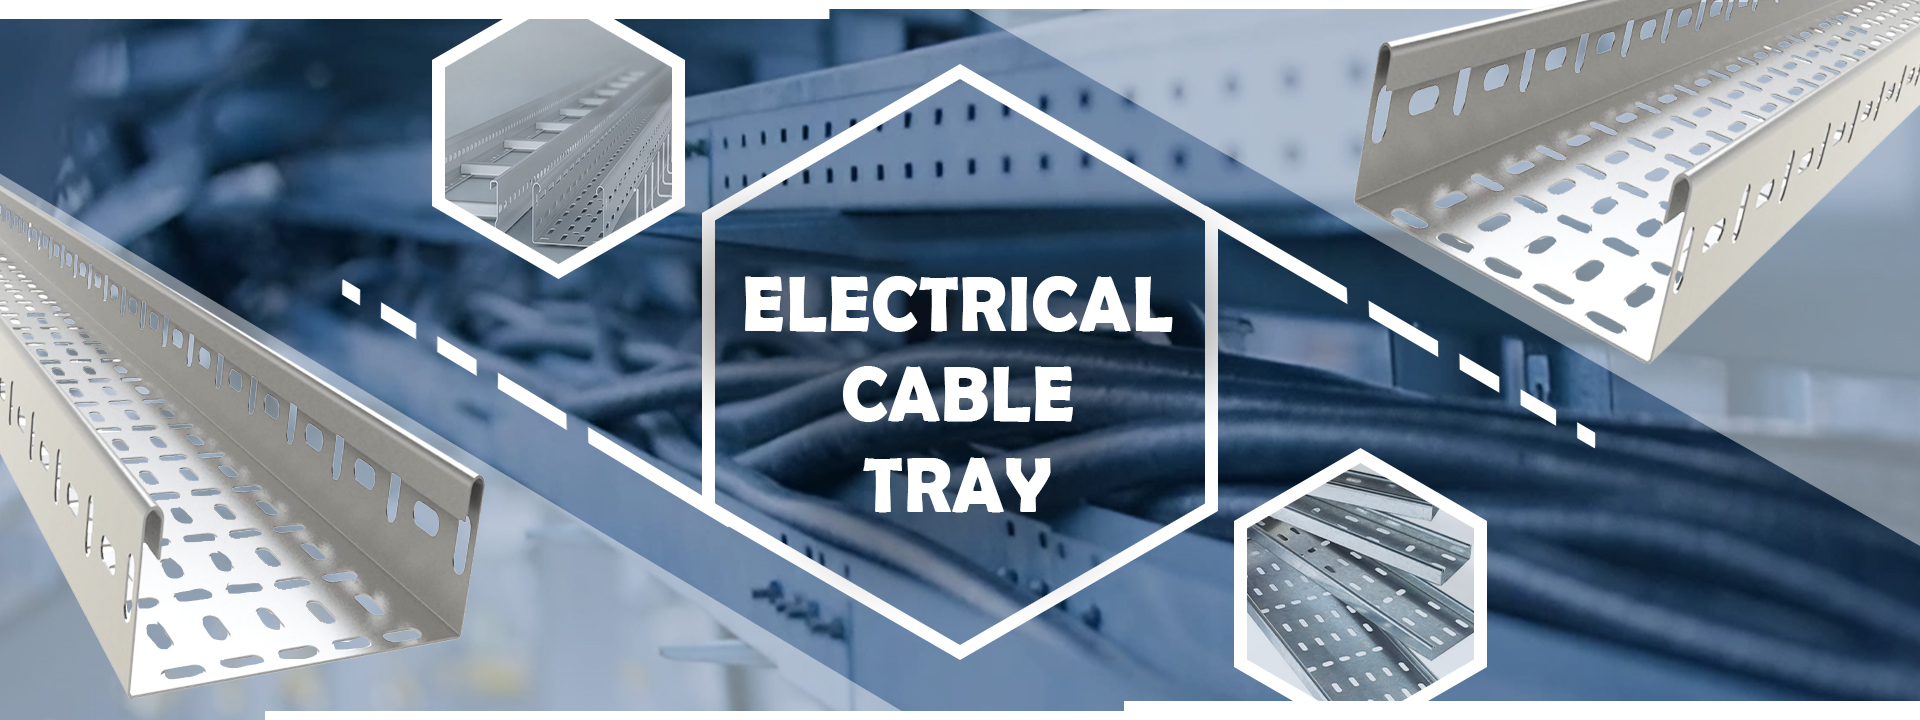 Electrical Cable Tray Manufacturers in Salem